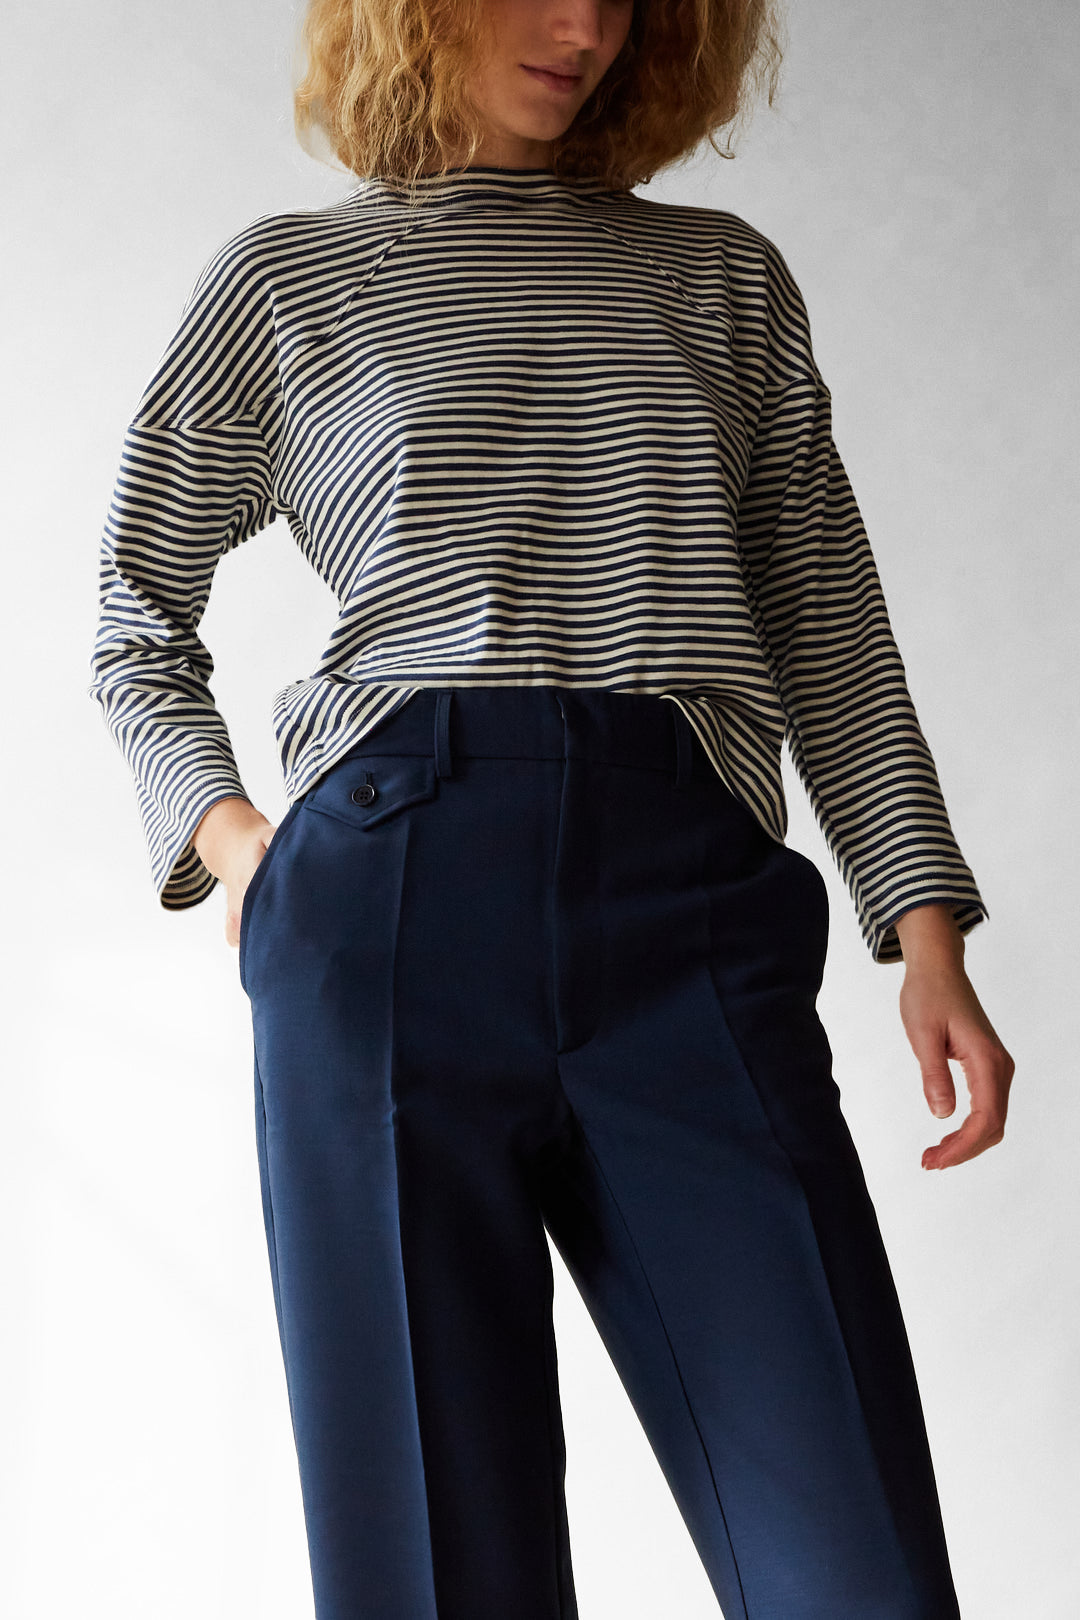 Miles Top in Marine Jersey Stripe by Caron Callahan